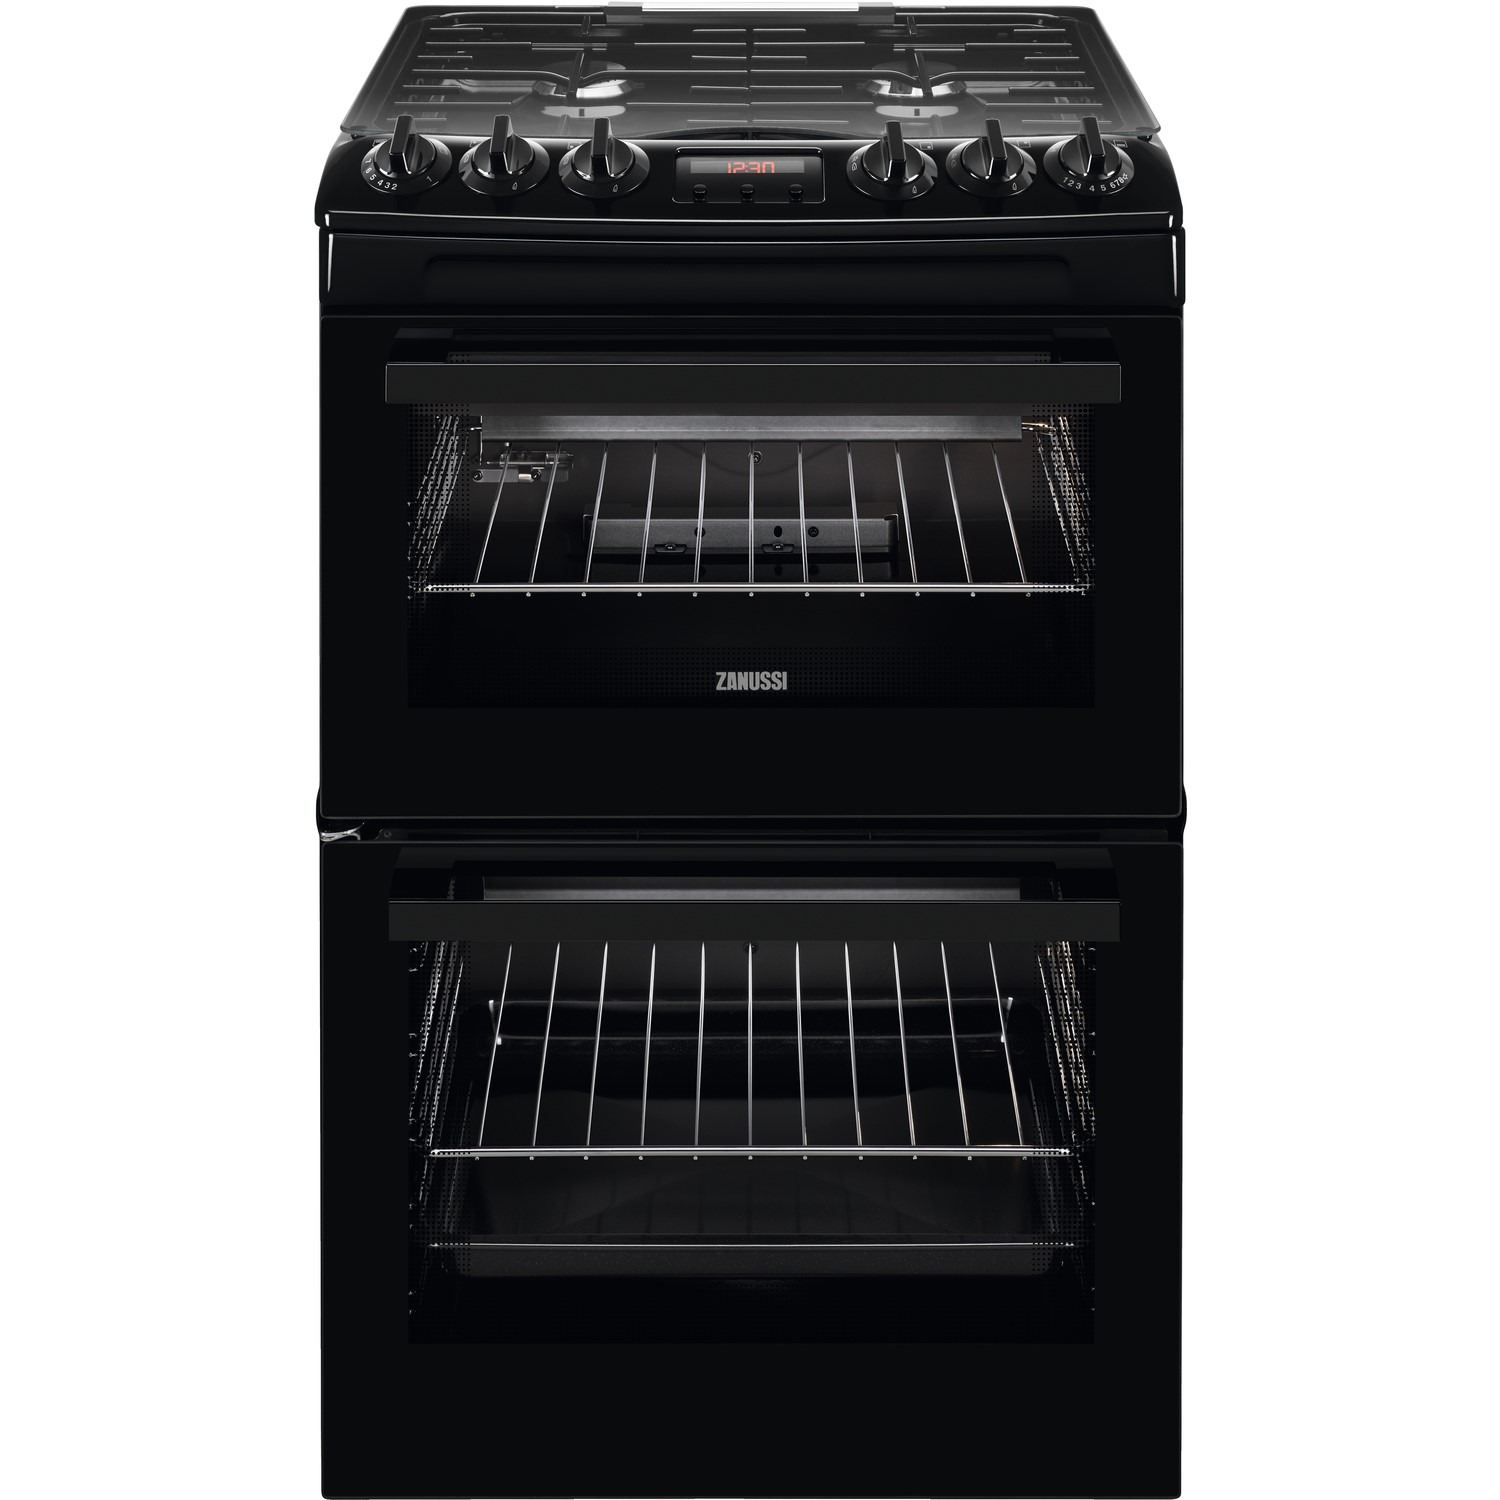 Refurbished Zanussi ZCG43250BA 55cm Double Oven Gas Cooker with Catalytic Liners Black